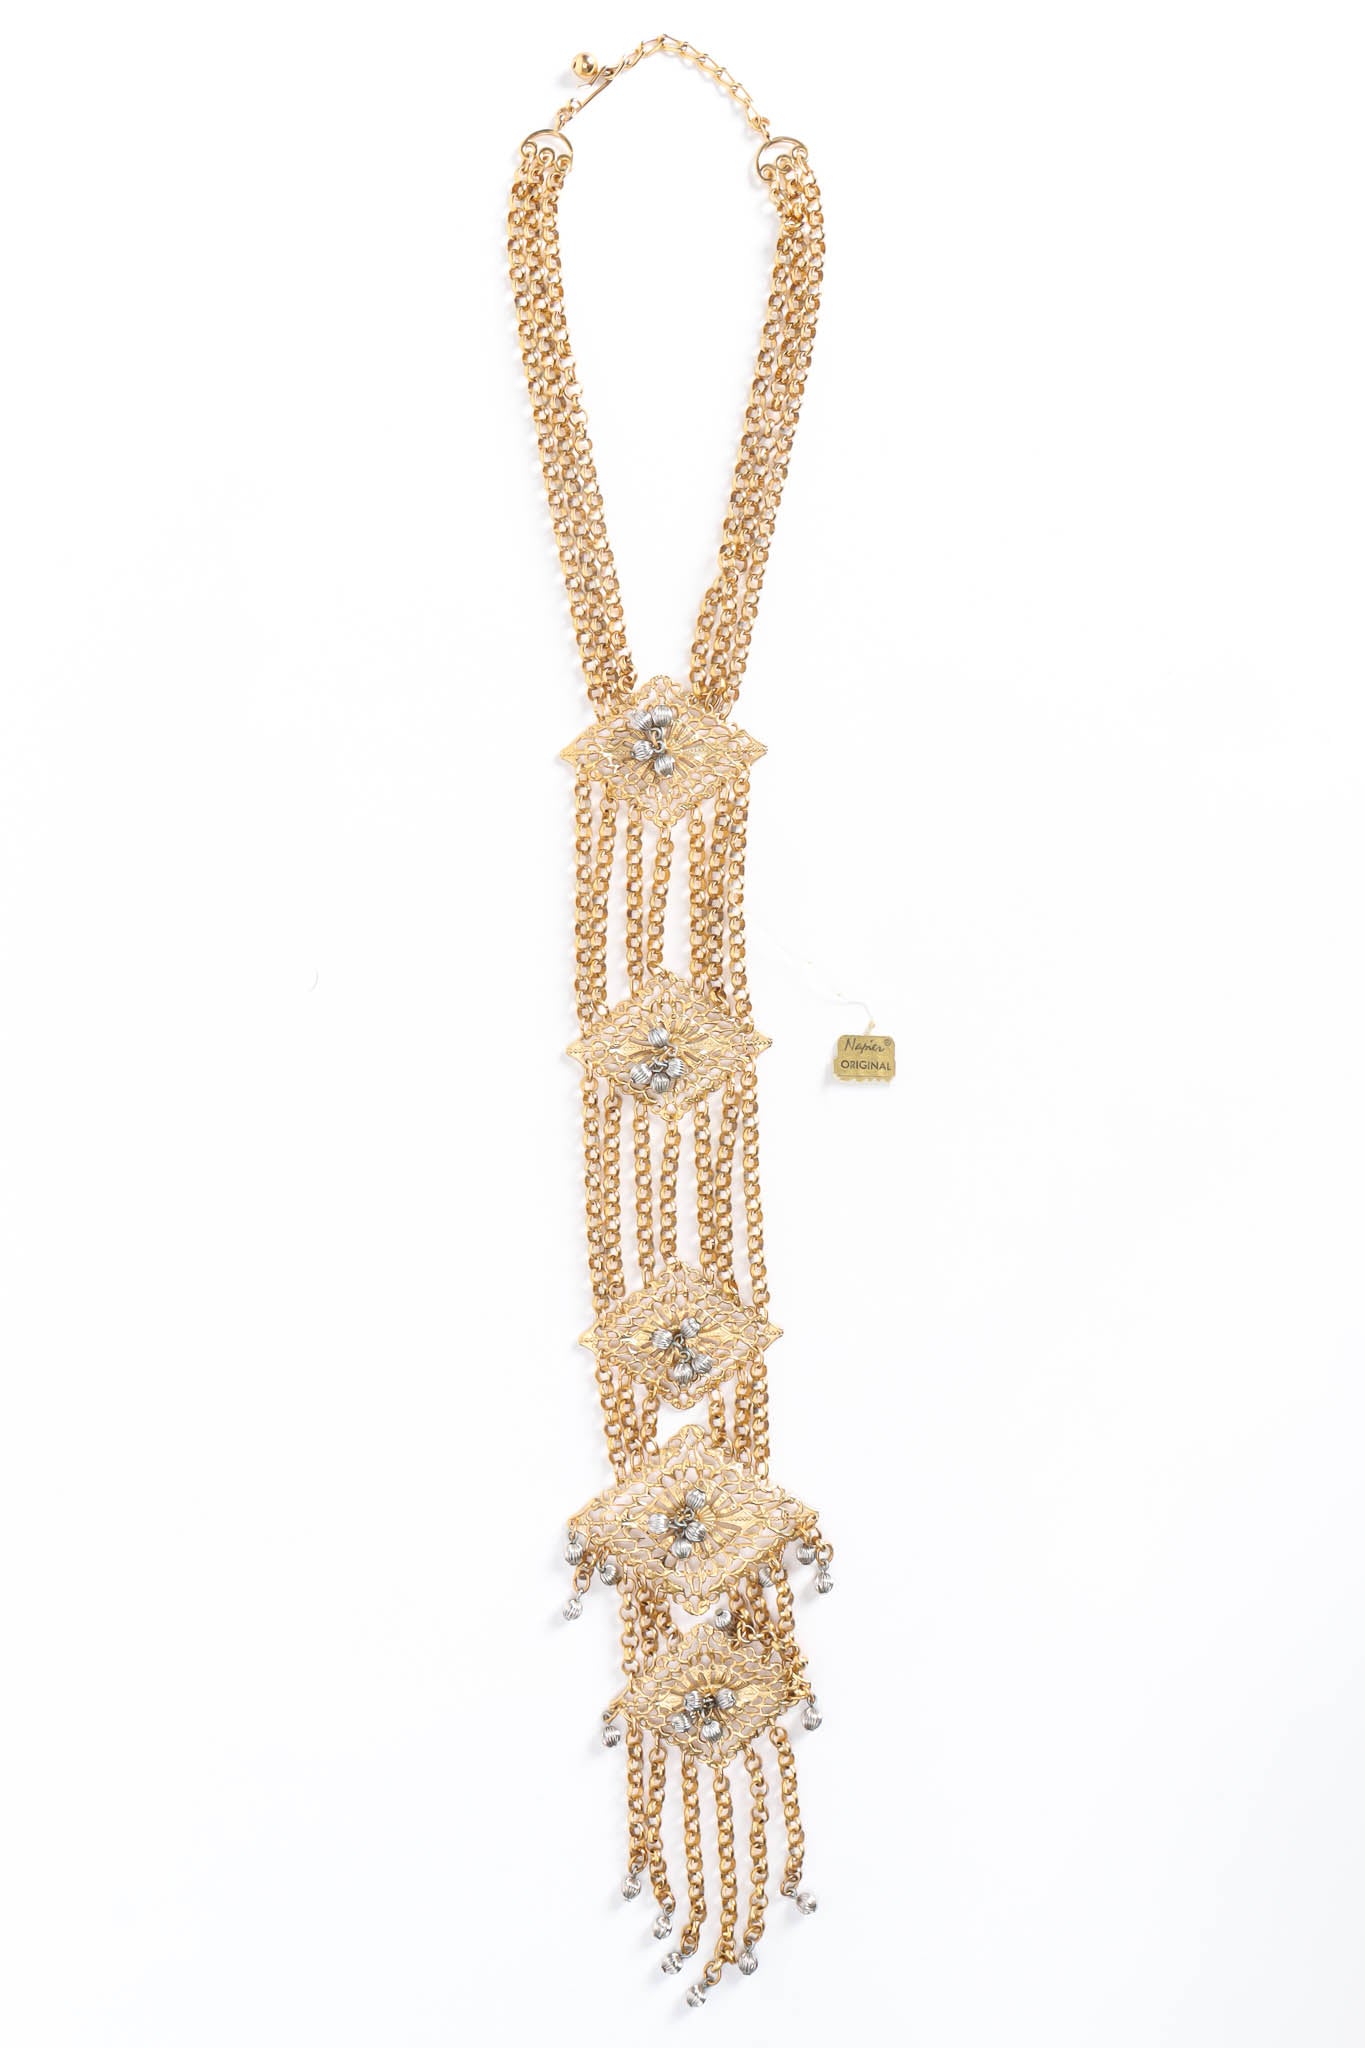 Vintage Napier Filigree Pom Waterfall Necklace front @ Recess Los Angeles